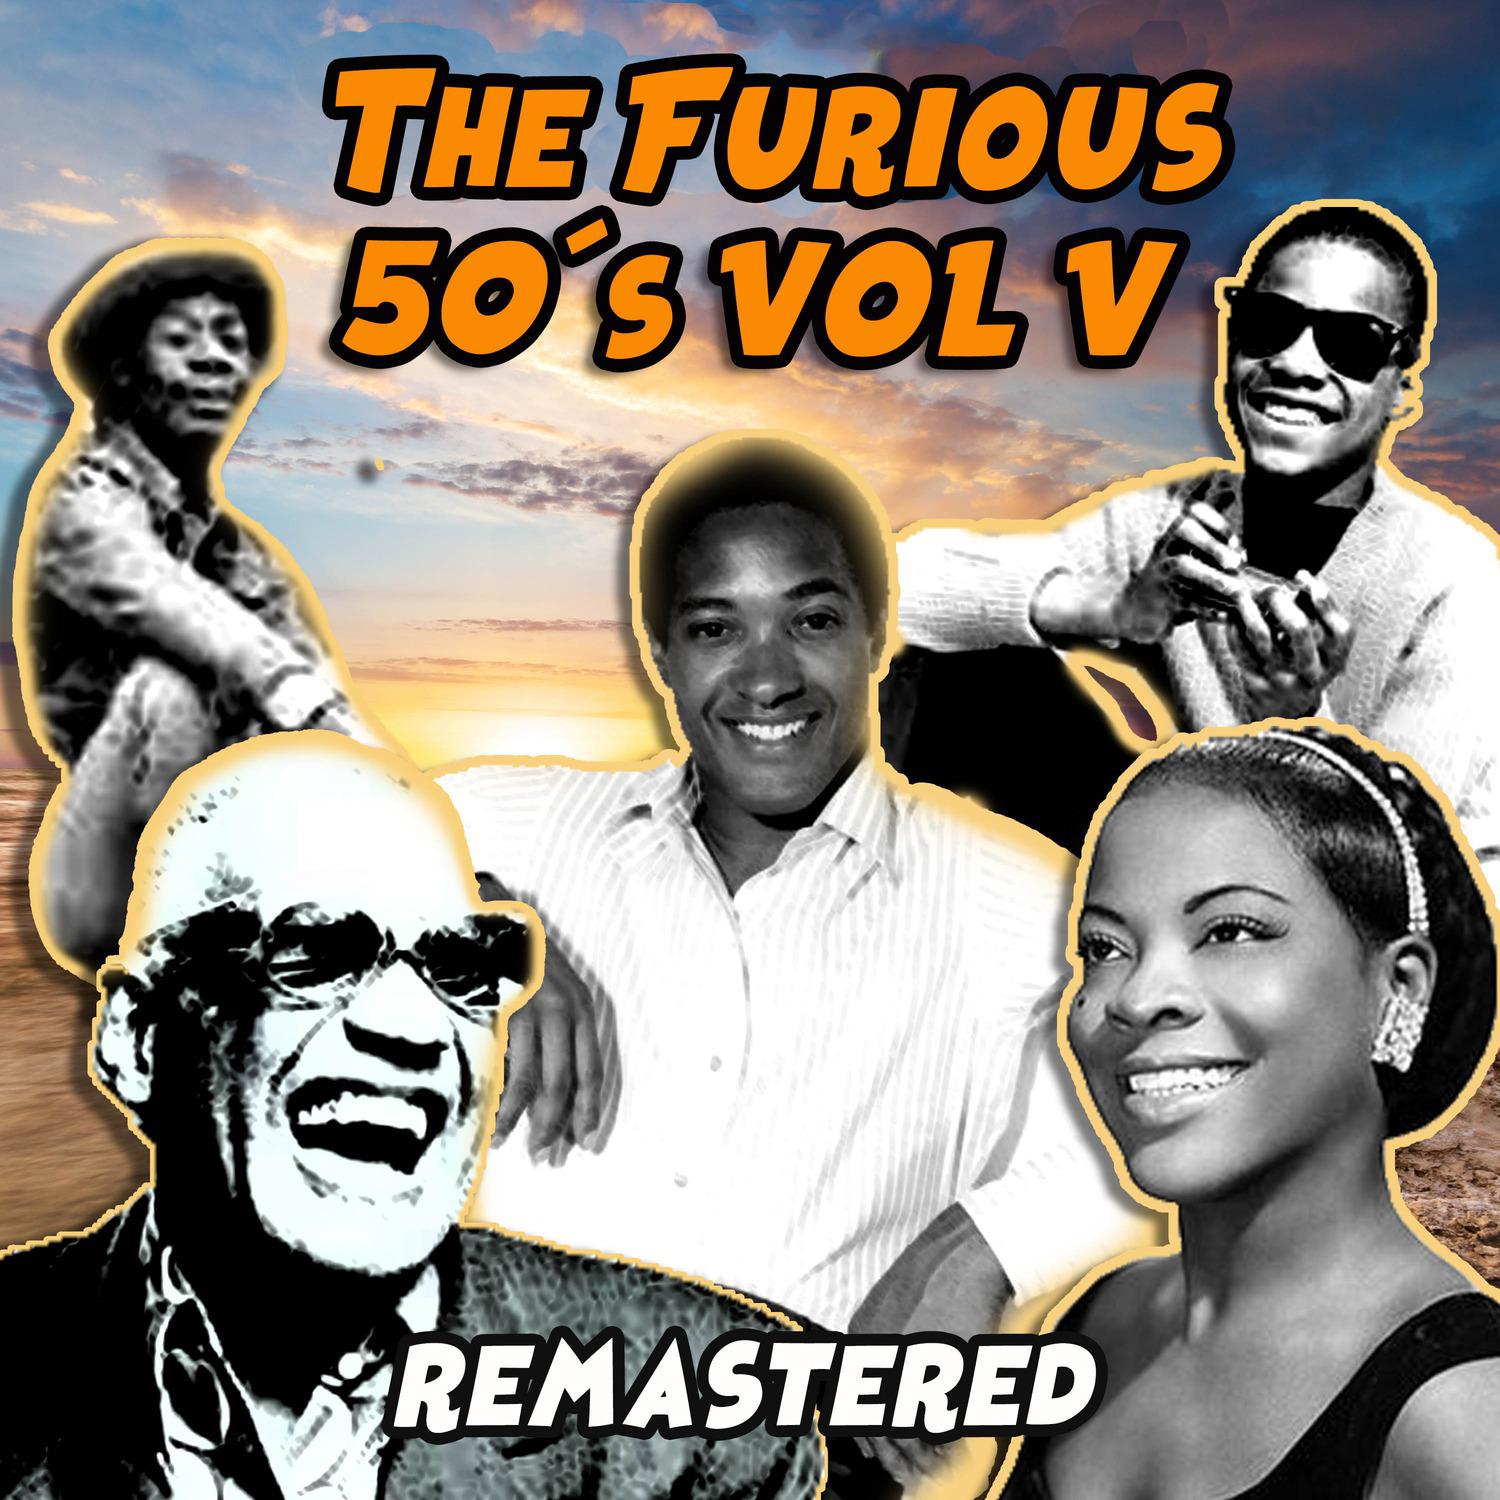 The Furious 50's, Vol. V (Remastered)